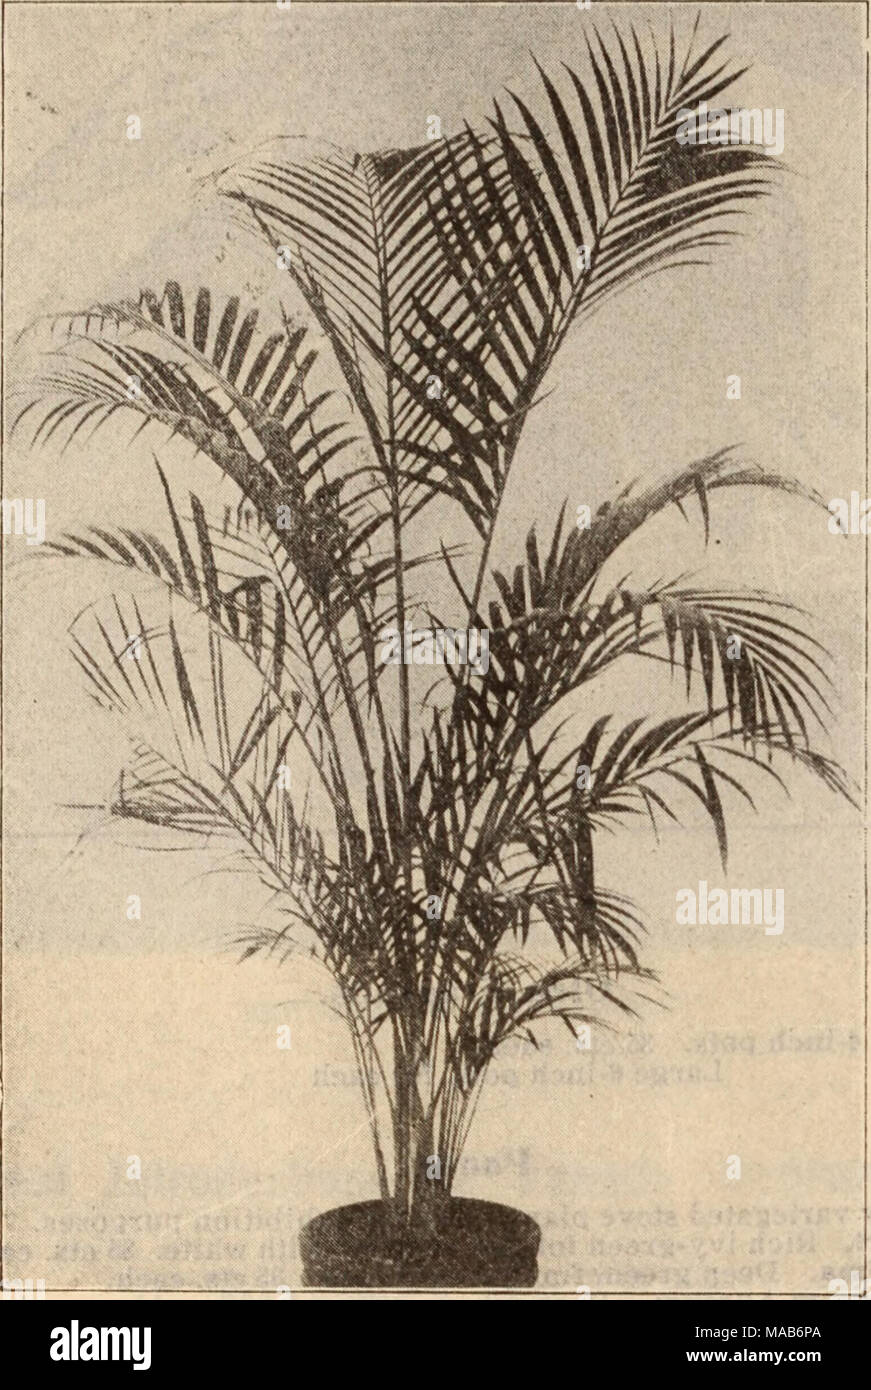 . Dreer's wholesale price list / Henry A. Dreer. . ARECA LUTKSCENS Acanthorhiza Aculeata. 6-inch pots, $1.50 each. Areca Lutescens. A splendid lot of 3-inch pots, 3 plants in a pot, a size that is very popular and that sells freely. $1.25 per doz.; $10.00 per 100; $90.00 per 1000. Areca Verschaffelti. 2'/4-inch pots, $1.50 per doz.; $10.00 per 100. 3 &quot; 2.00 &quot; 15.00 Arenga Saccharifera. 3-inch pots, 25 cts. each; $2.50 per doz. Caryota Sobolifera. 3-inch pots, 15 inches high. $1.50 per doz.; $10.00 per 100. Caryota Urens. 2'4-inch pots, $1.25 per doz.; $8.00 per 100. 3 &quot; &quot; 1 Stock Photo